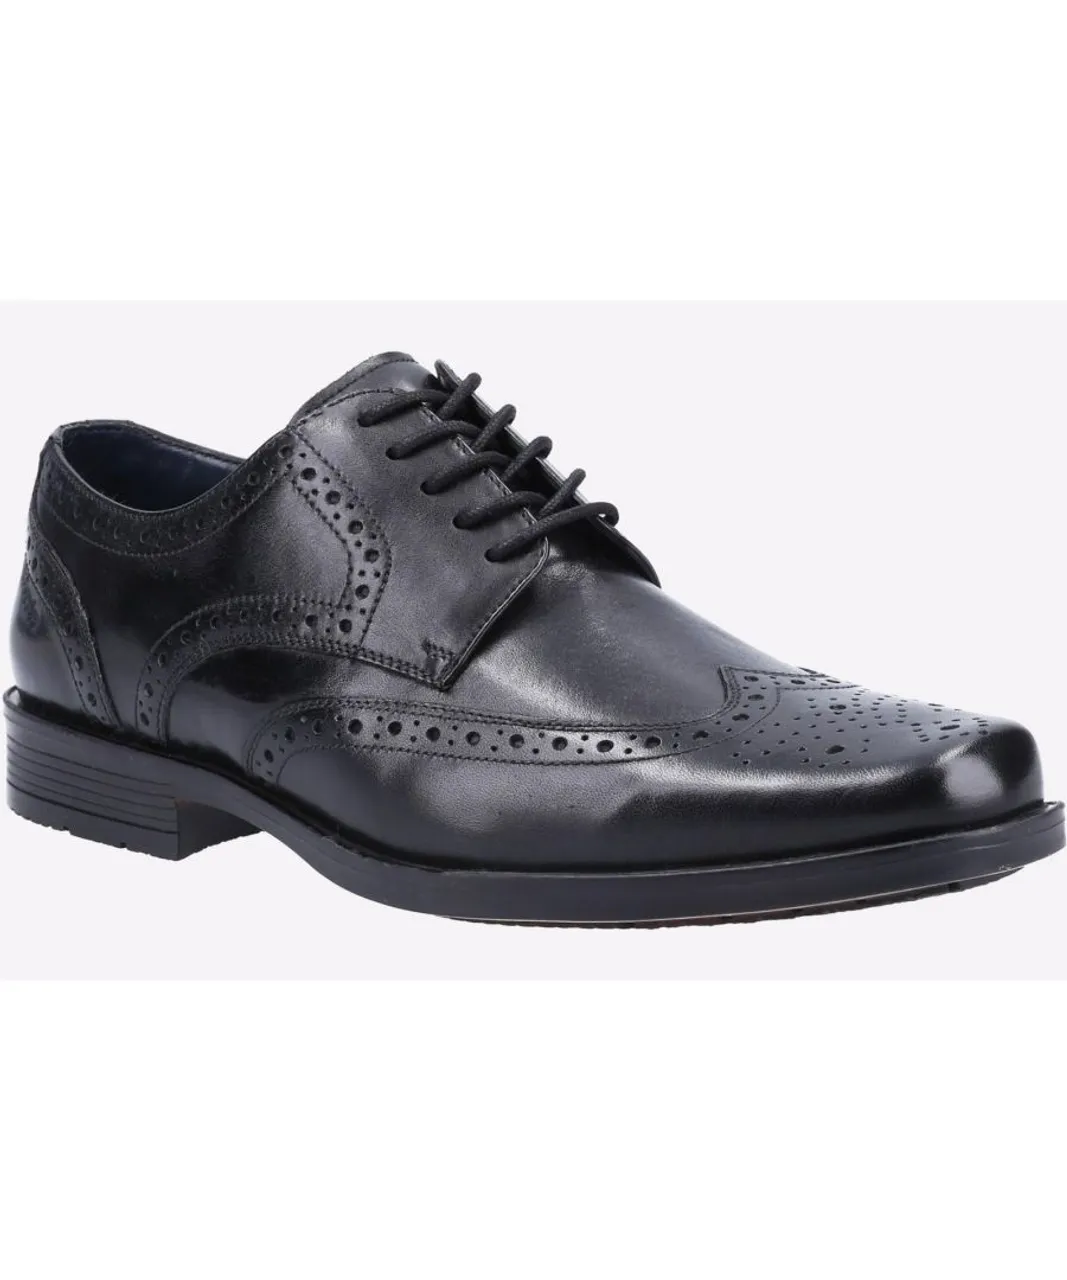 Hush Puppies Brace MEMORY FOAM Mens - Black Leather (archived)